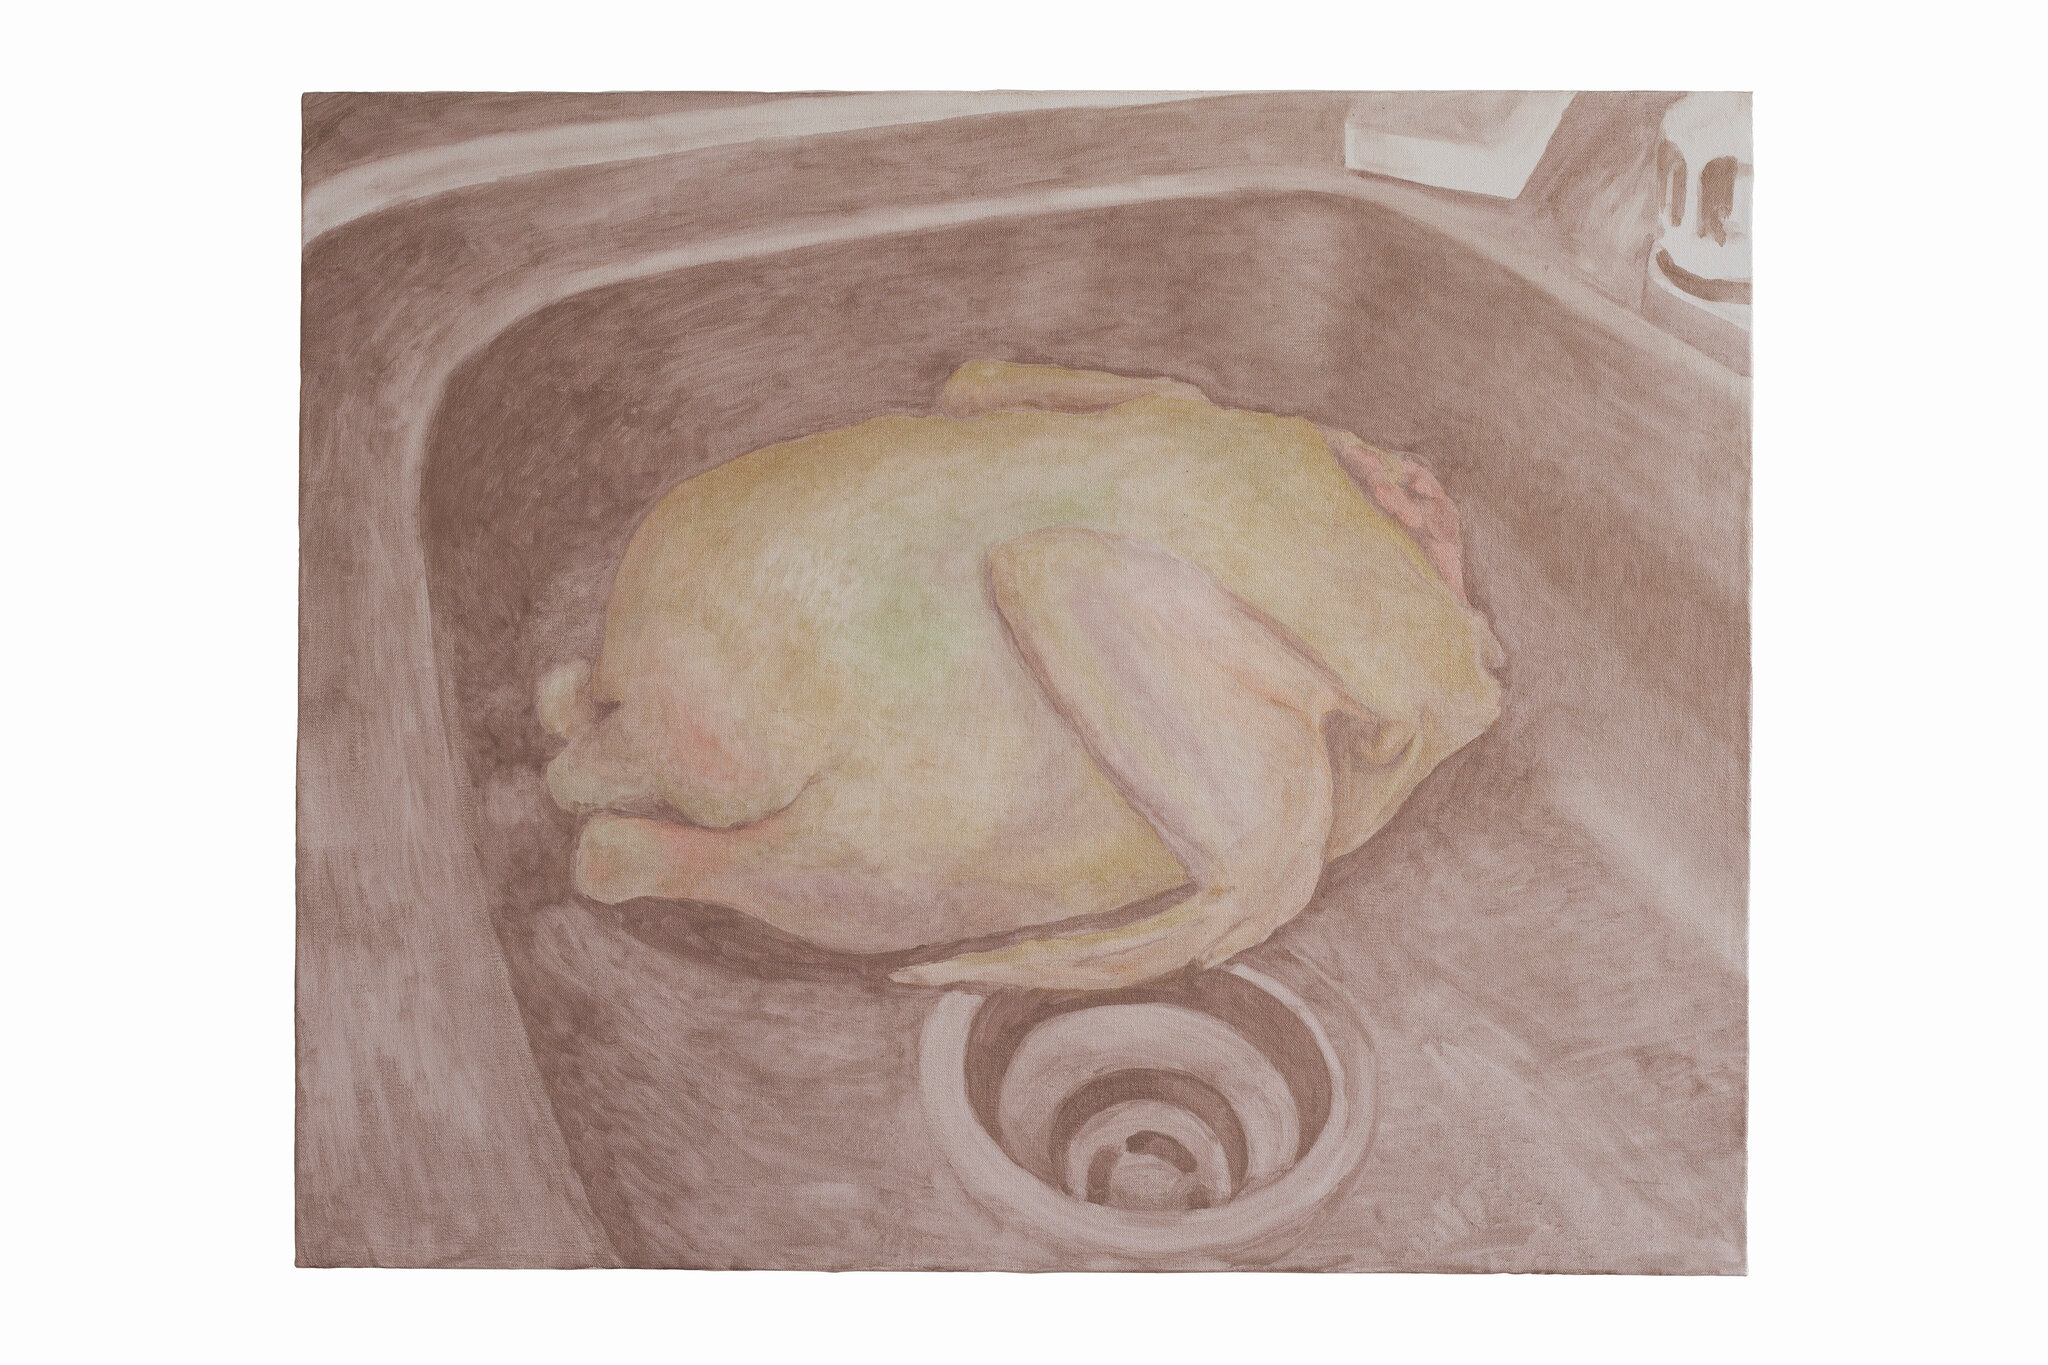 Leonel Salguero duck in the sink, 2022 Iridescent oil paint on canvas 65 × 80 cm (25 ⅝ × 31 ½ inches)